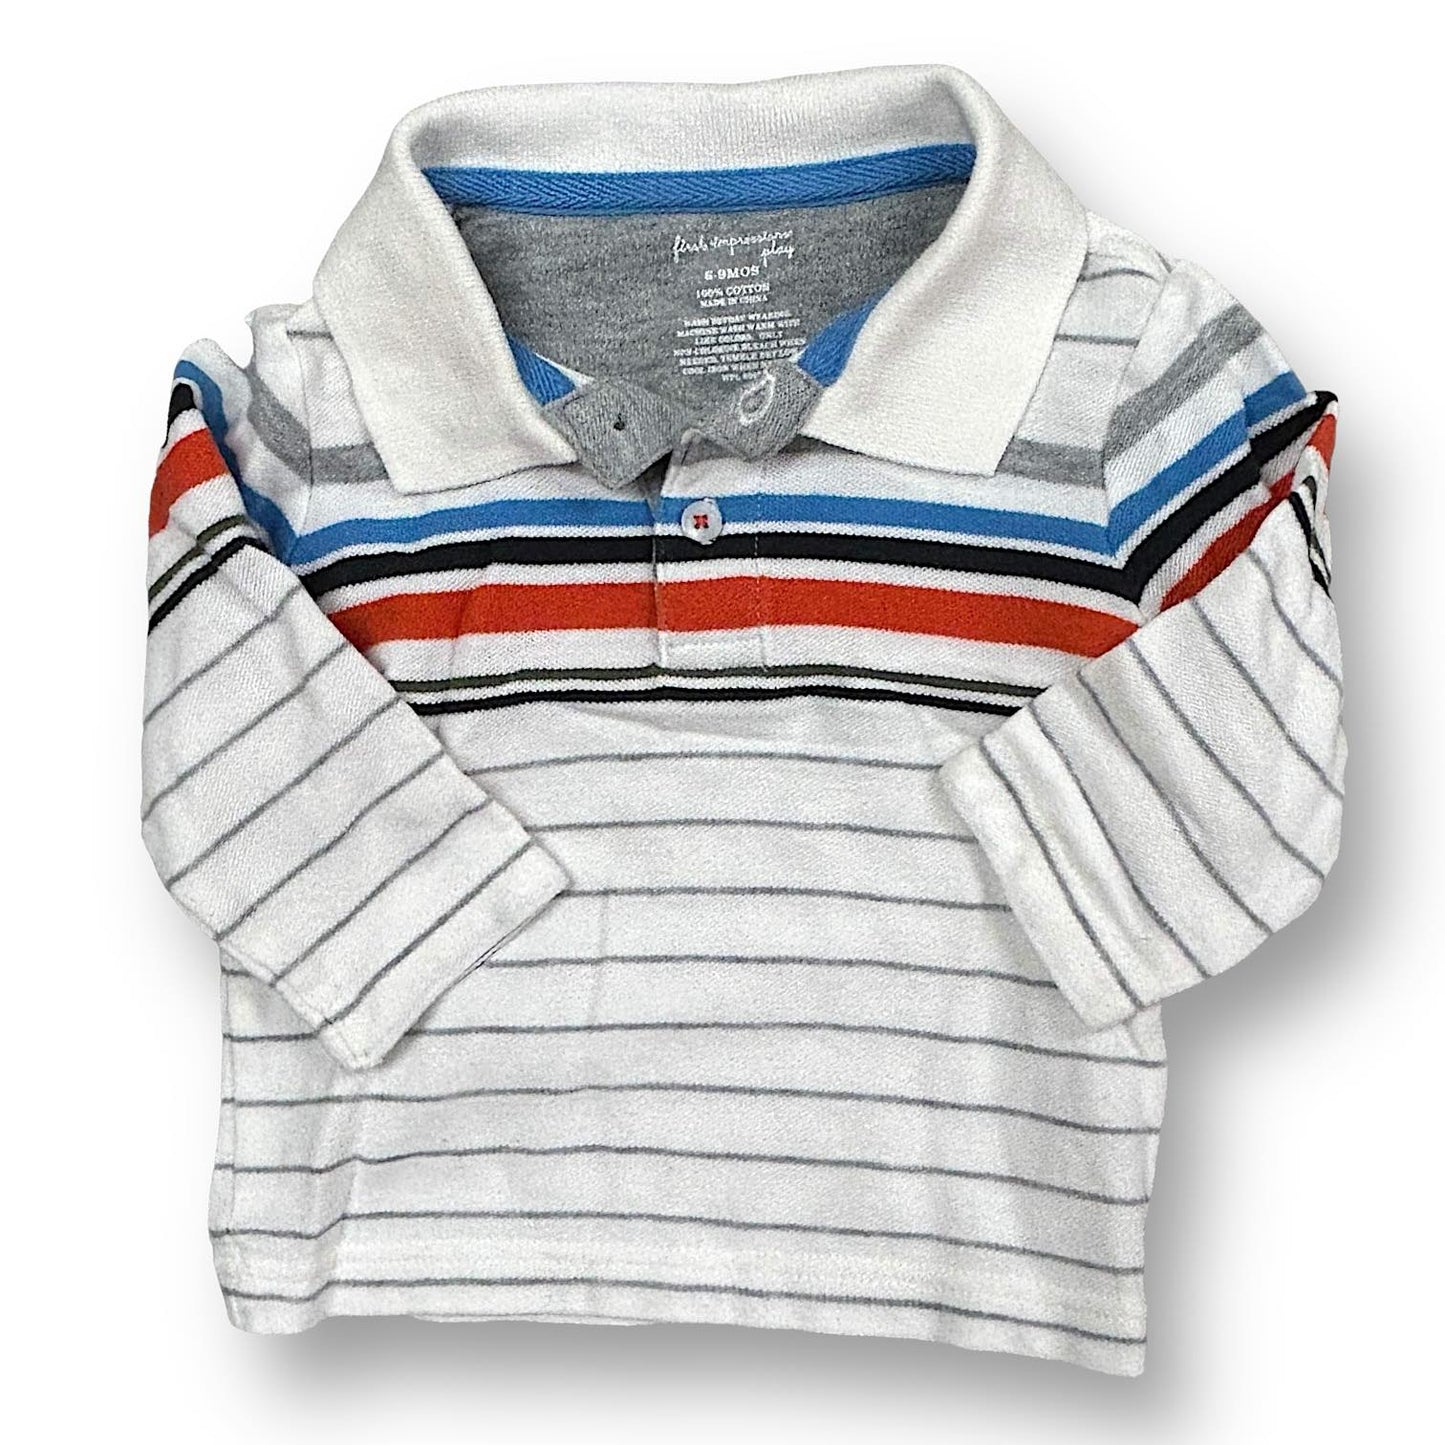 Boys First Impressions Size 6-9 Months Long Sleeve Striped Polo Shirt